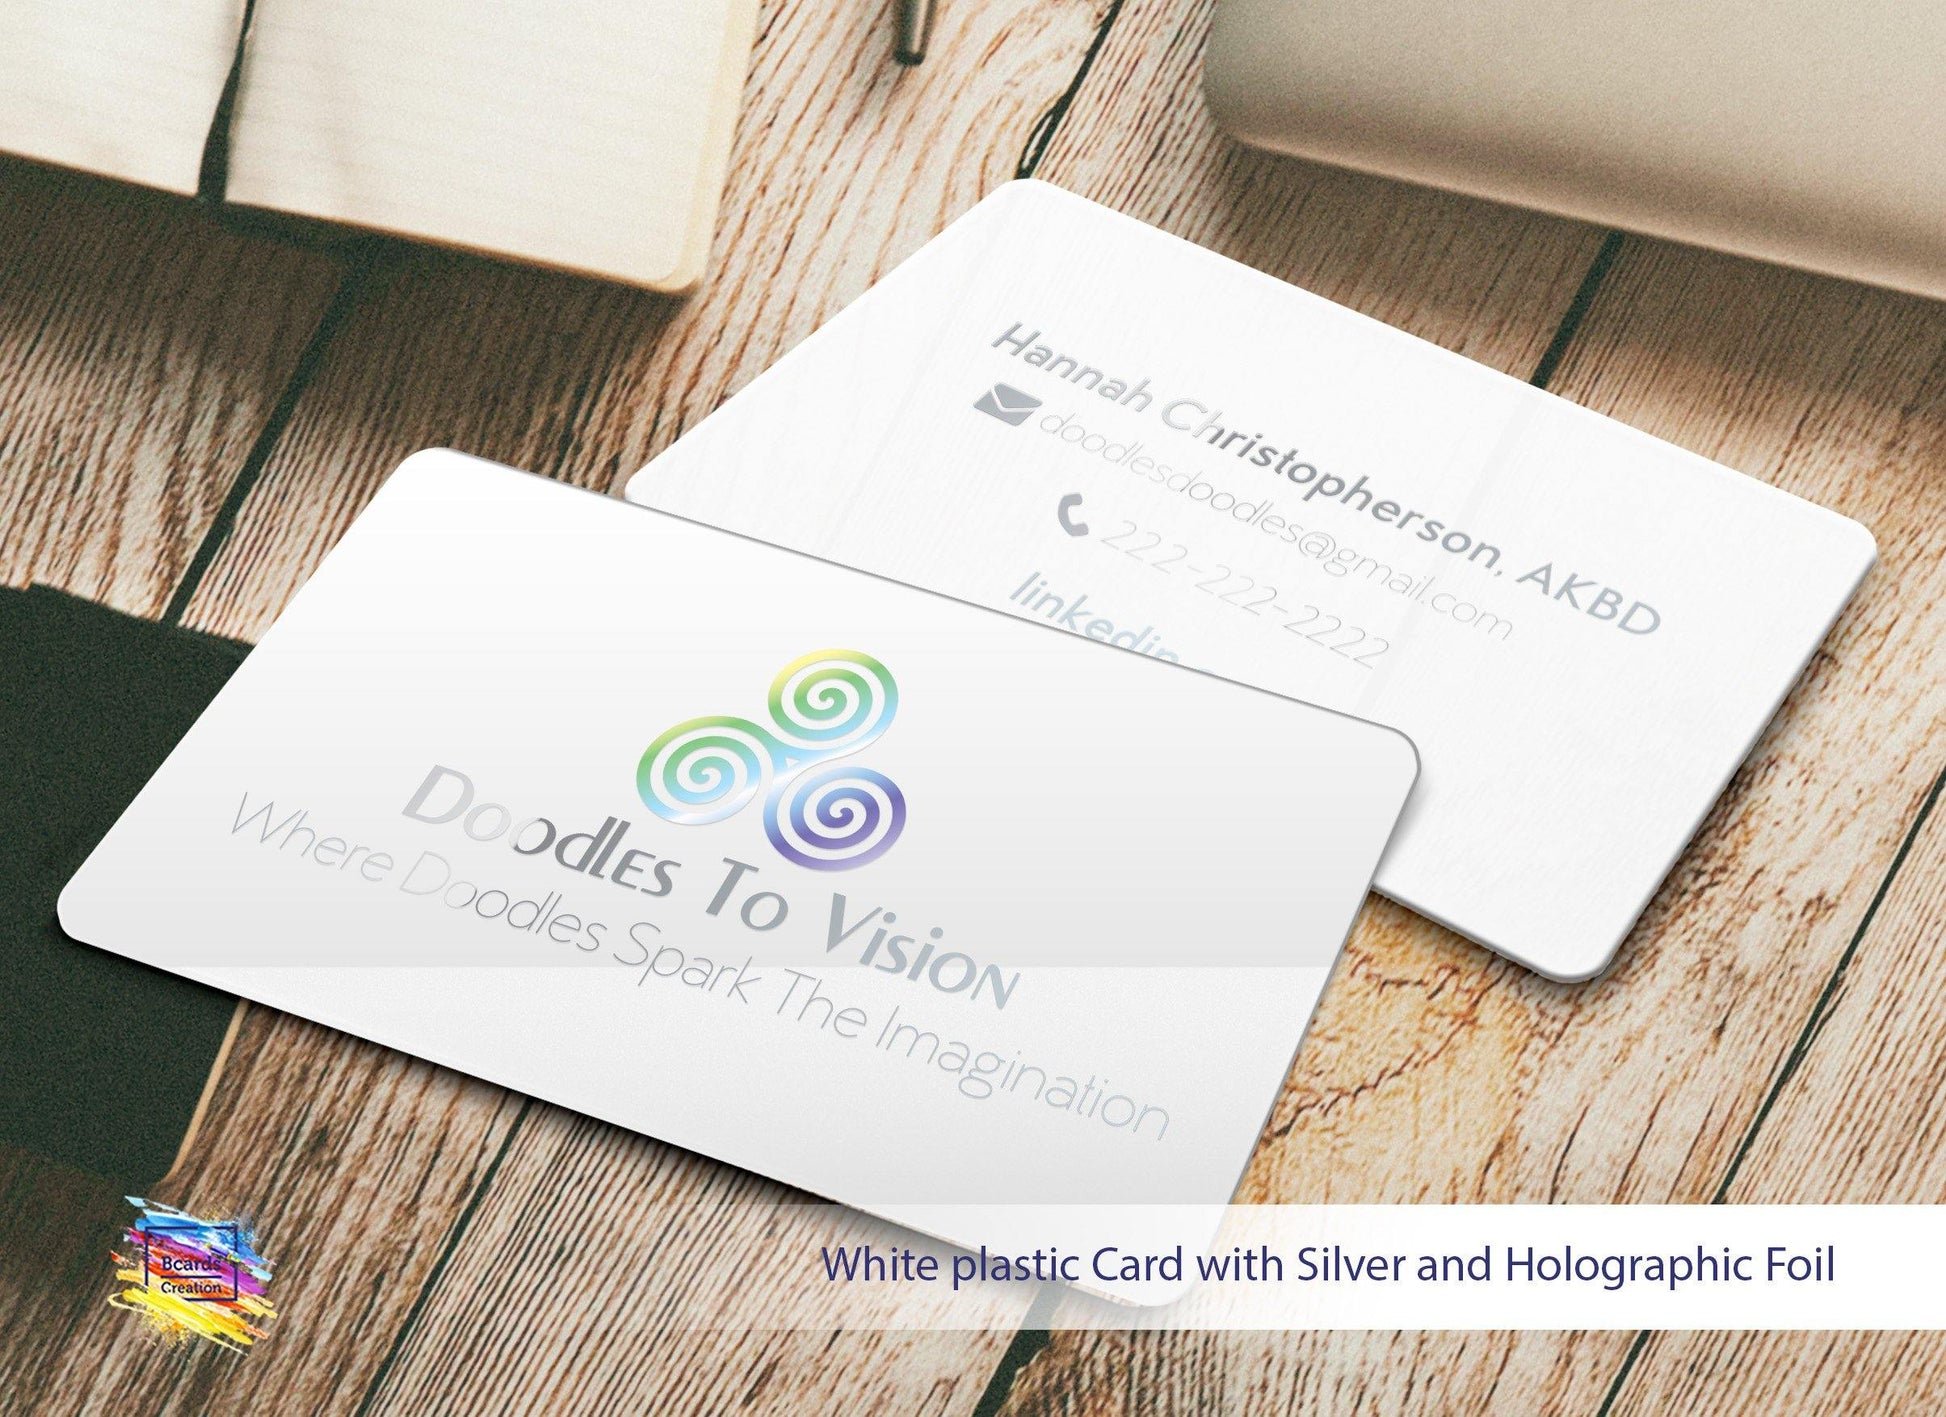 Full color Glossy Plastic Business Cards | Holographic Foil Stamping BcardsCreation